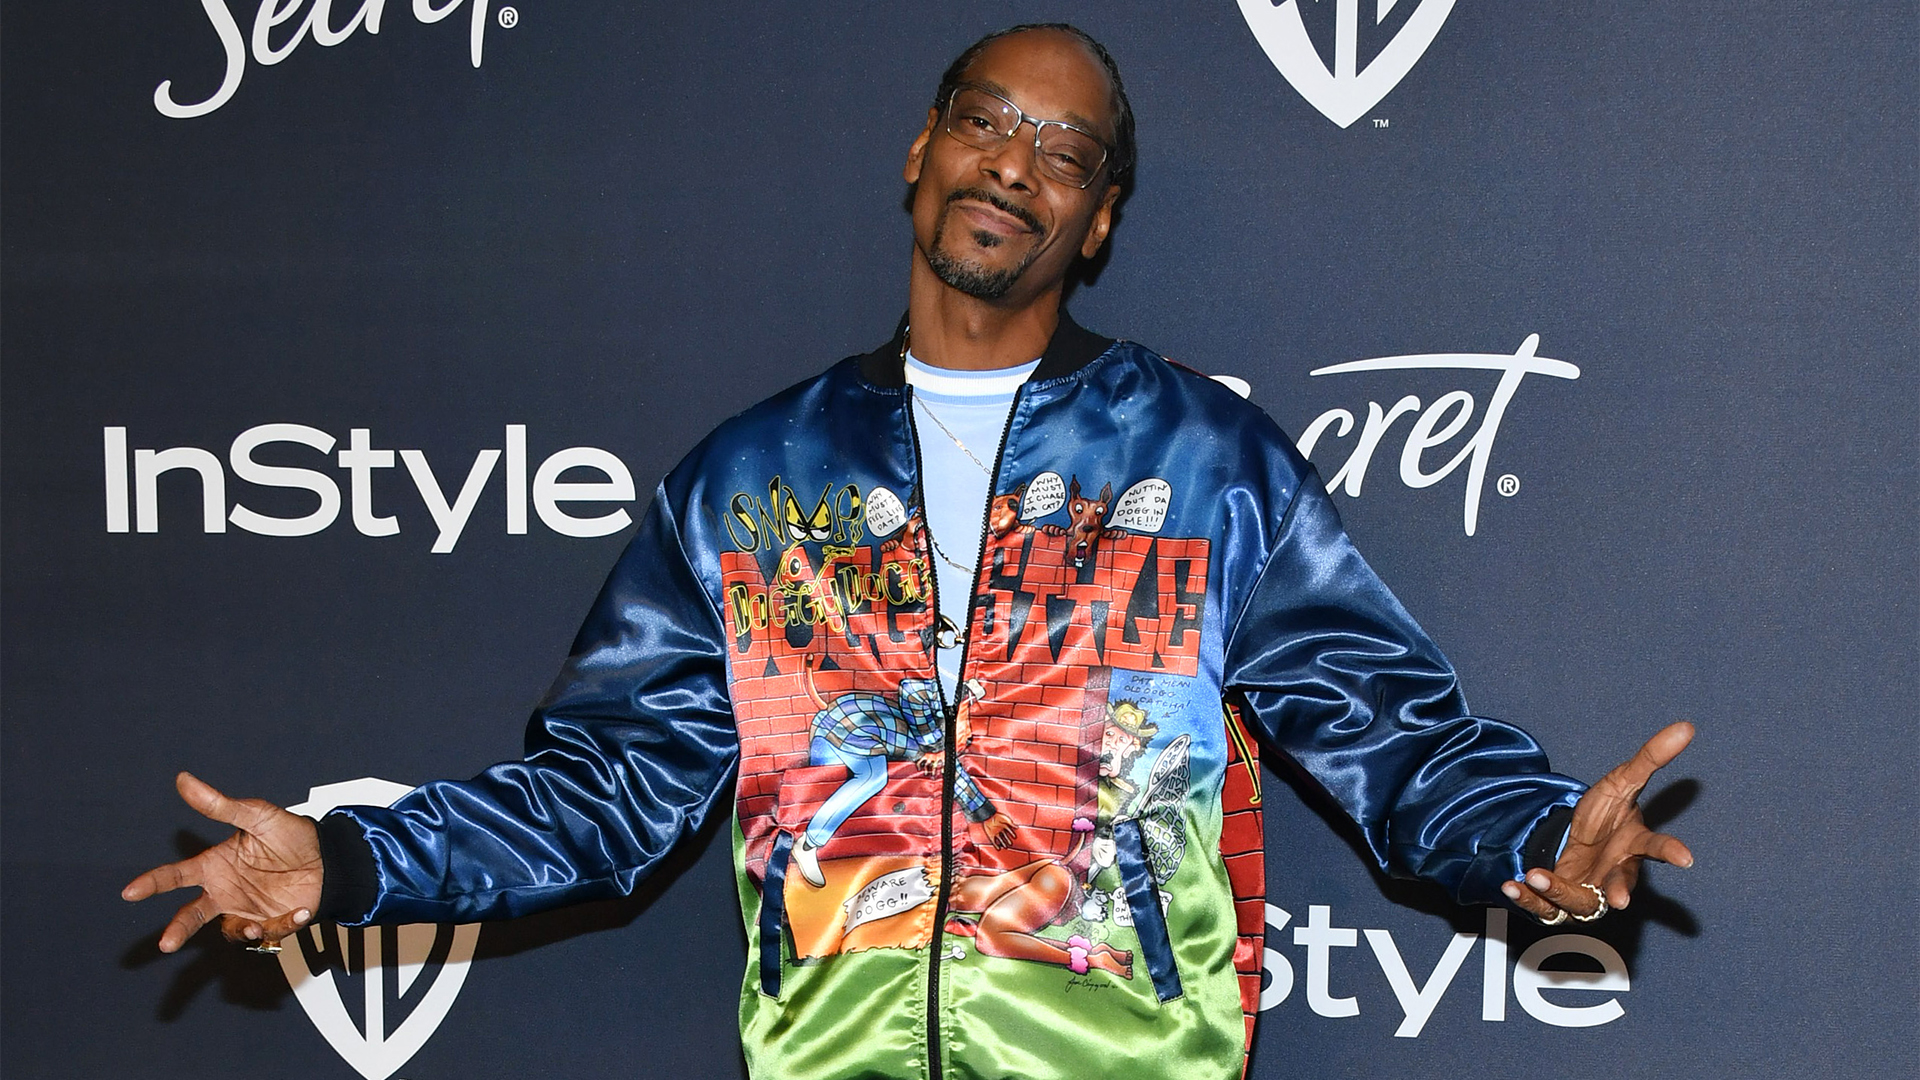 Trademark Filing Suggests Snoop Dogg Might Be Venturing Into The Hot Dog Business